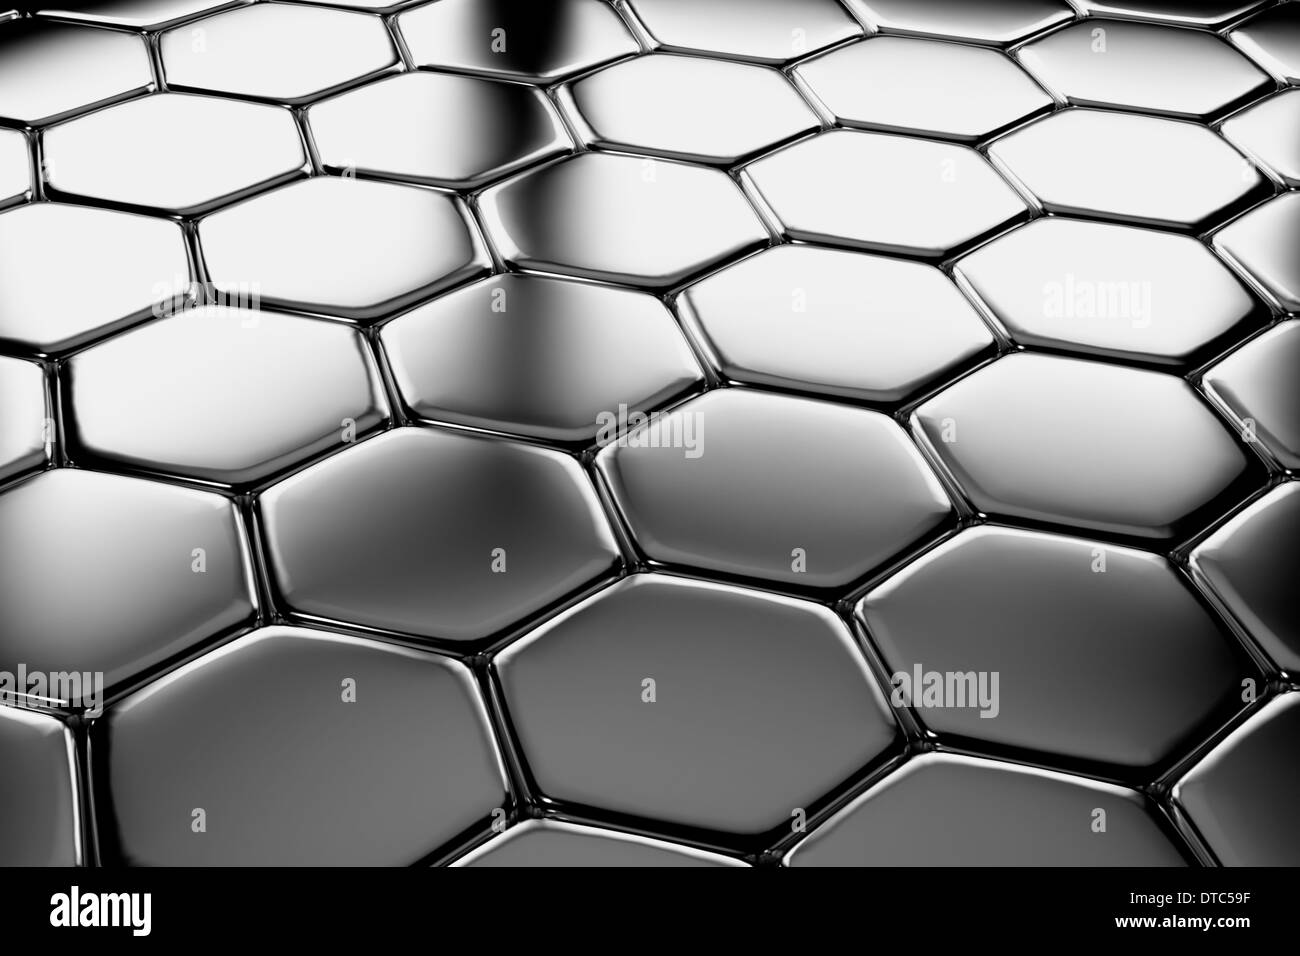 Steel hexagons flooring metal surface diagonal view shiny abstract industrial background Stock Photo